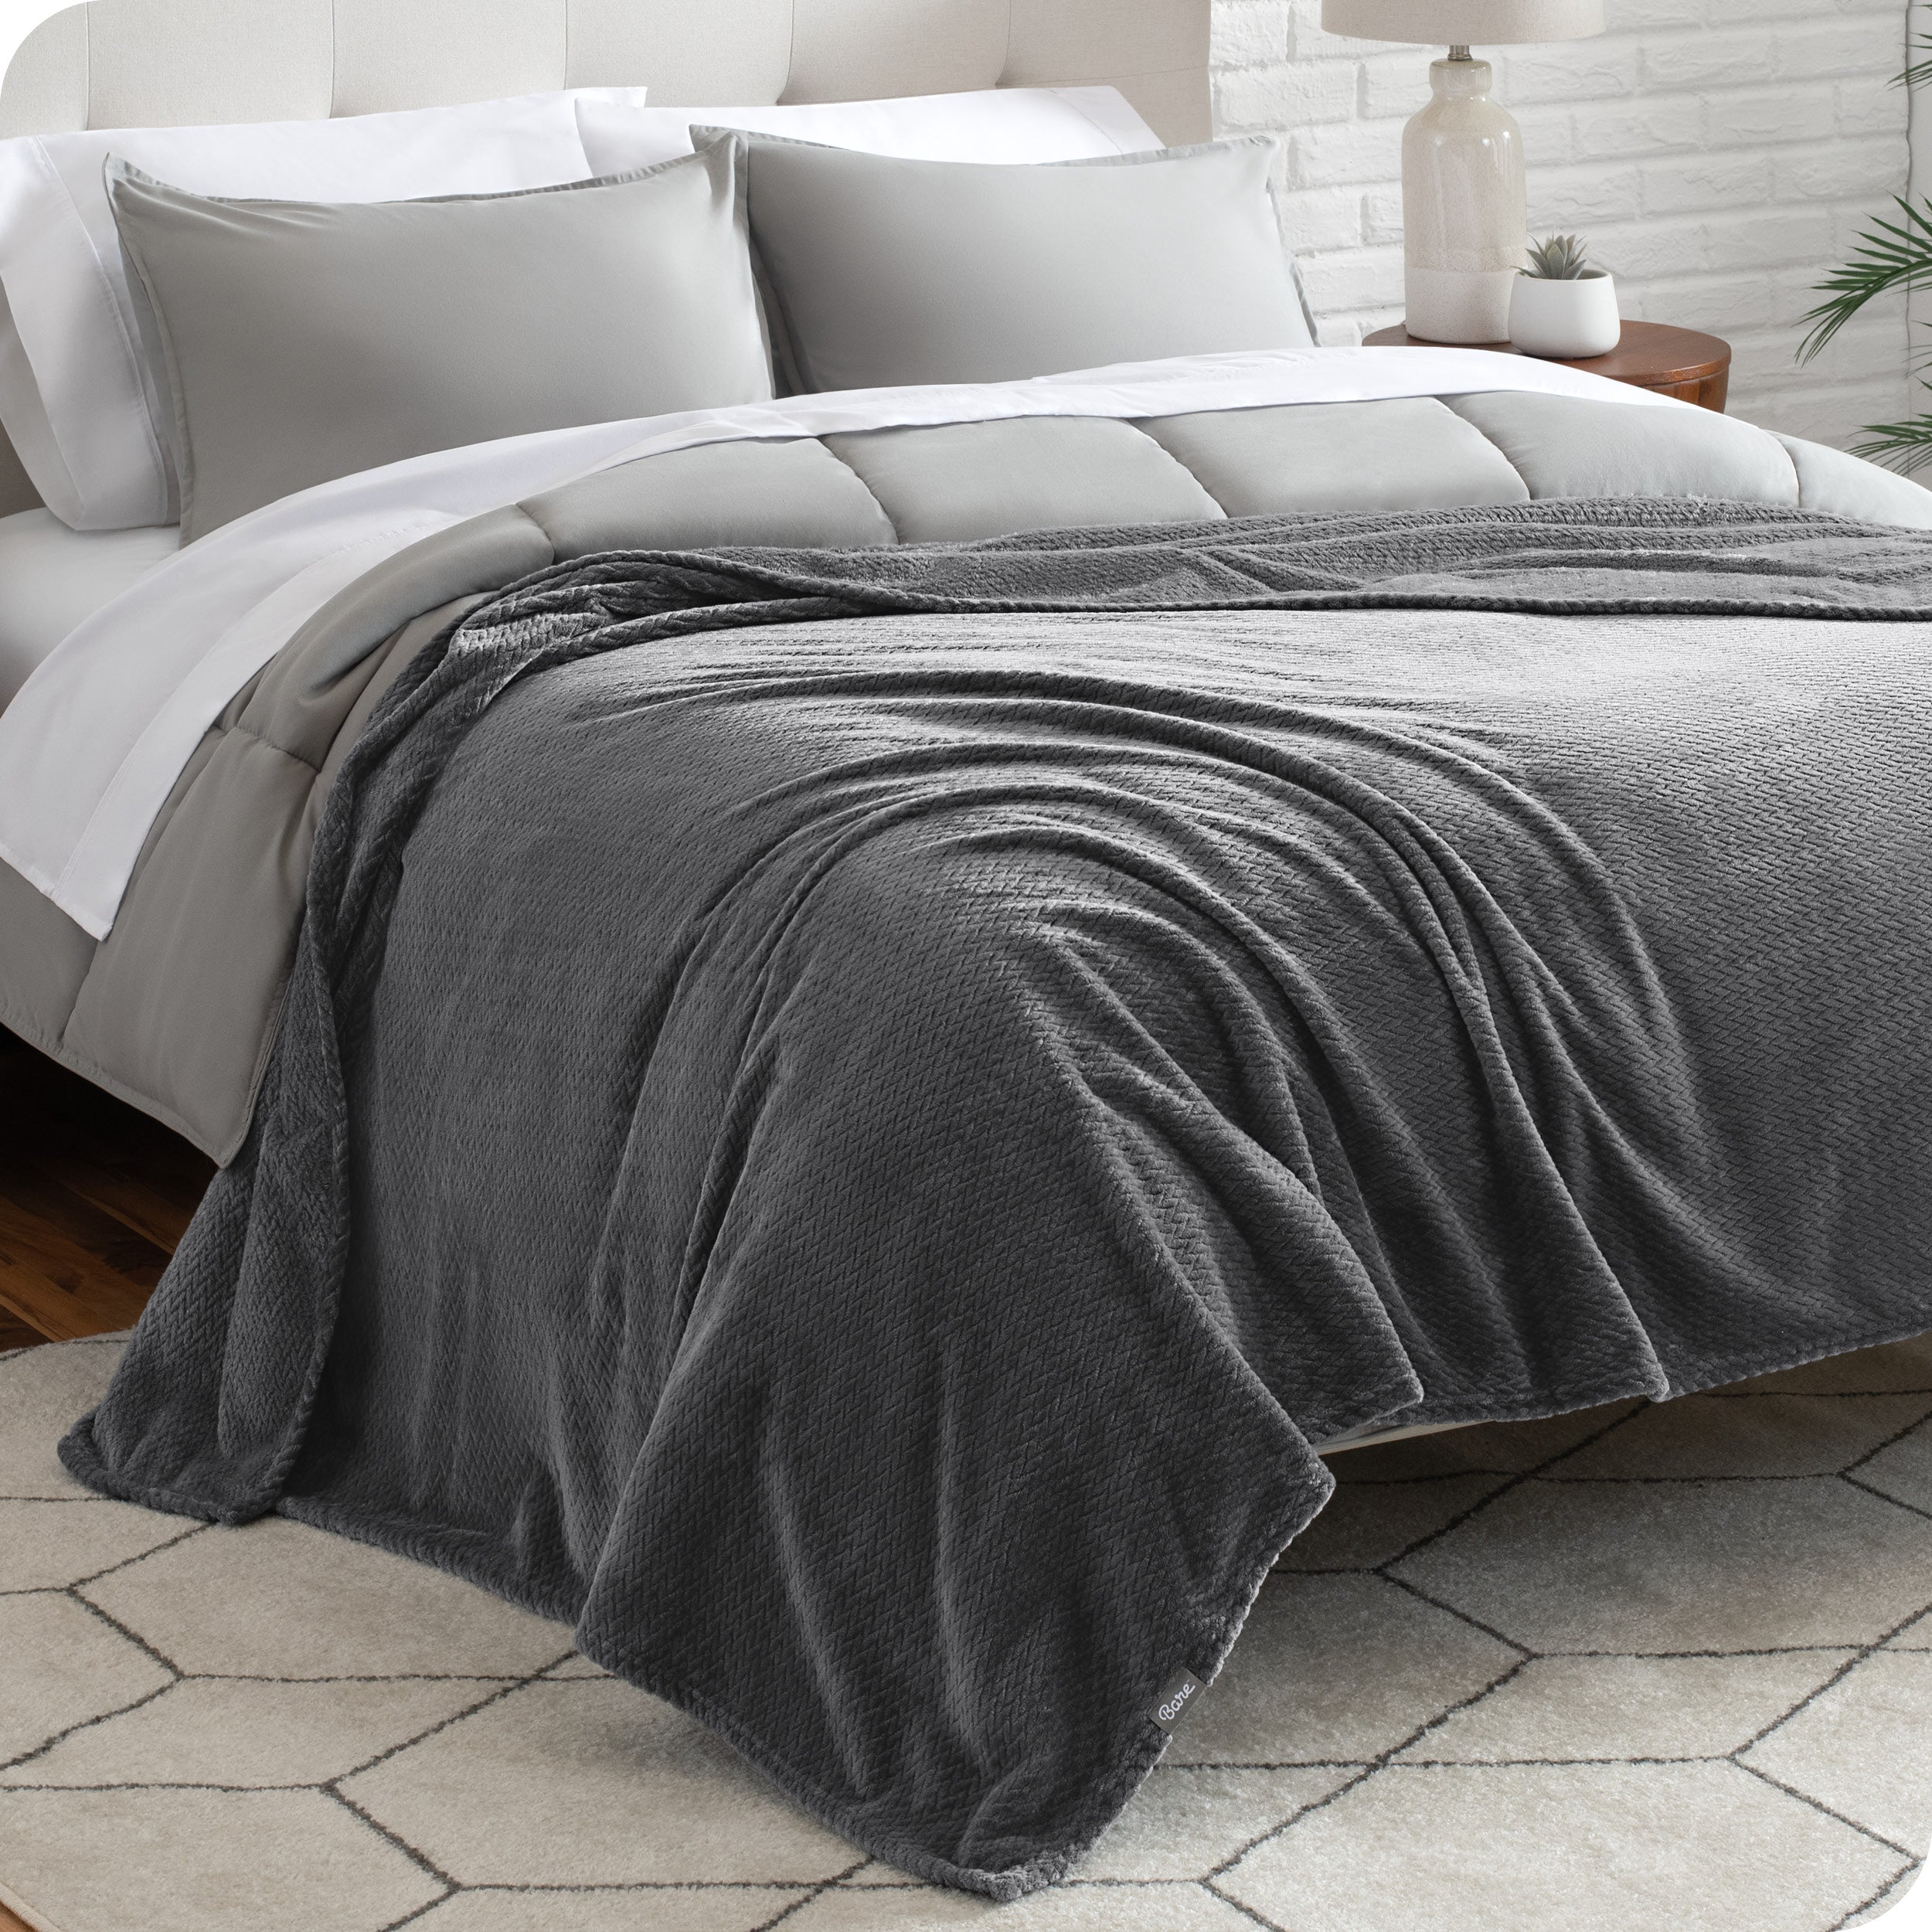 A textured microplush blanket is covering a bed, which has a comforter set on it.